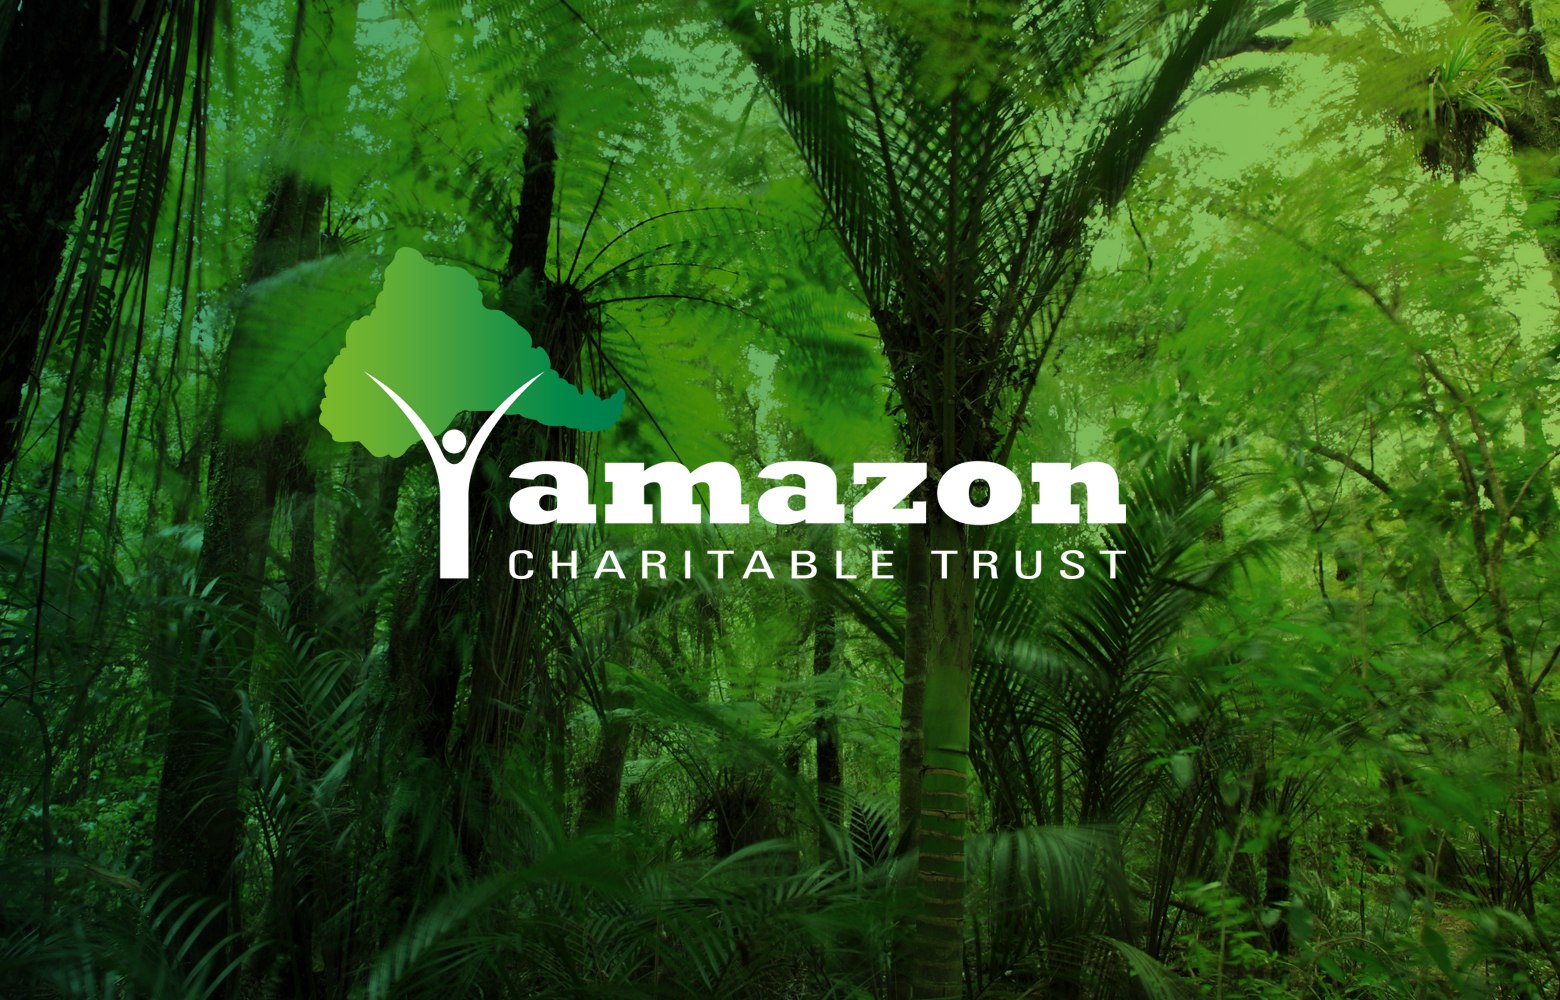 Great news from the rainforest